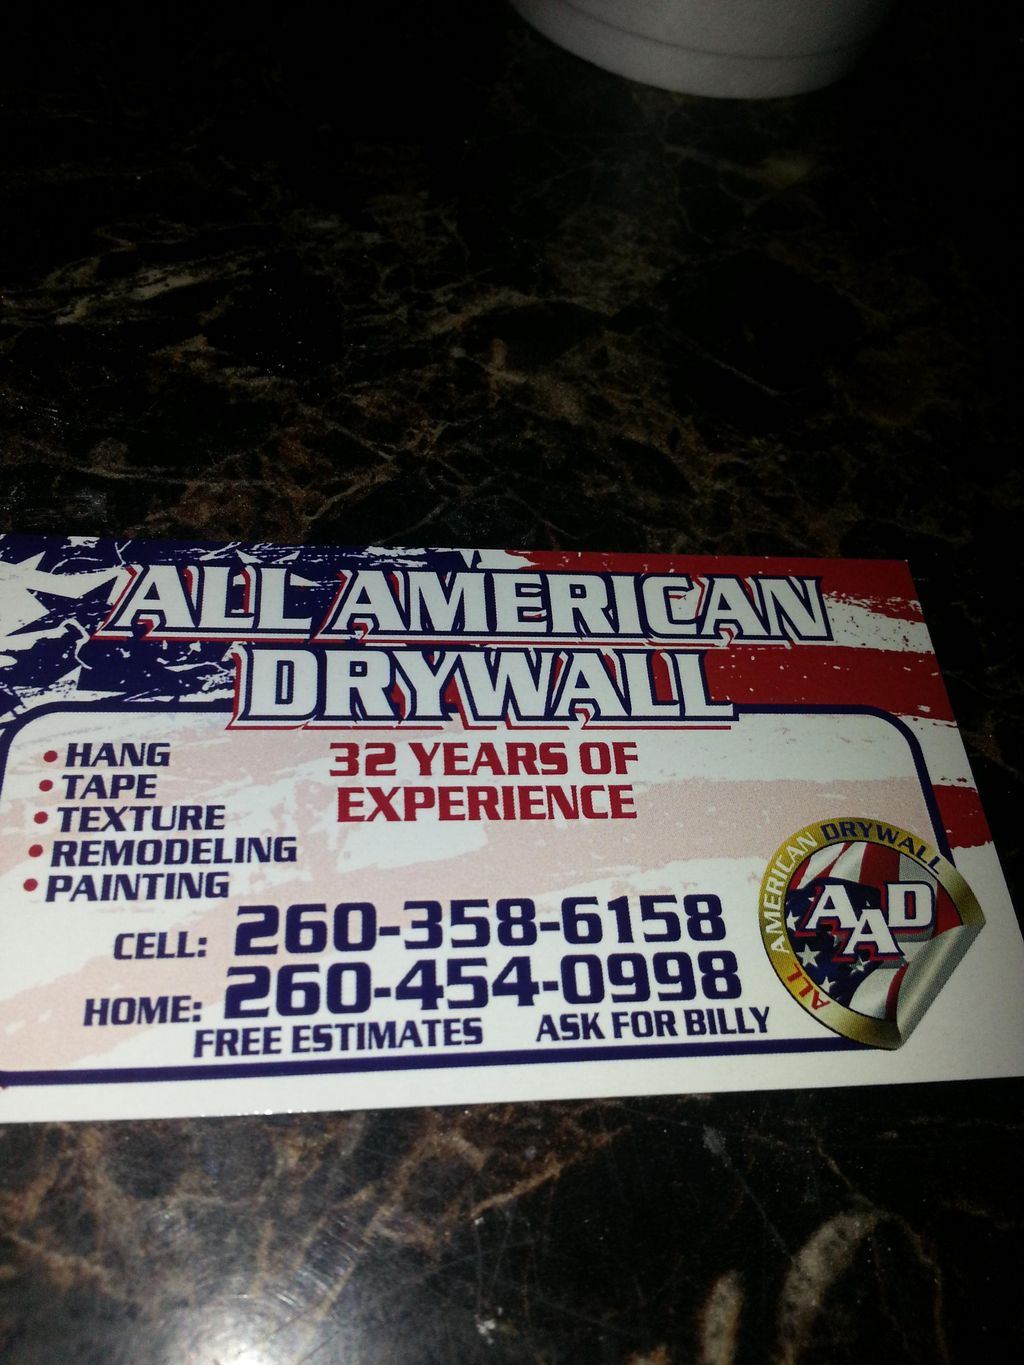 All American drywall painting and texturing